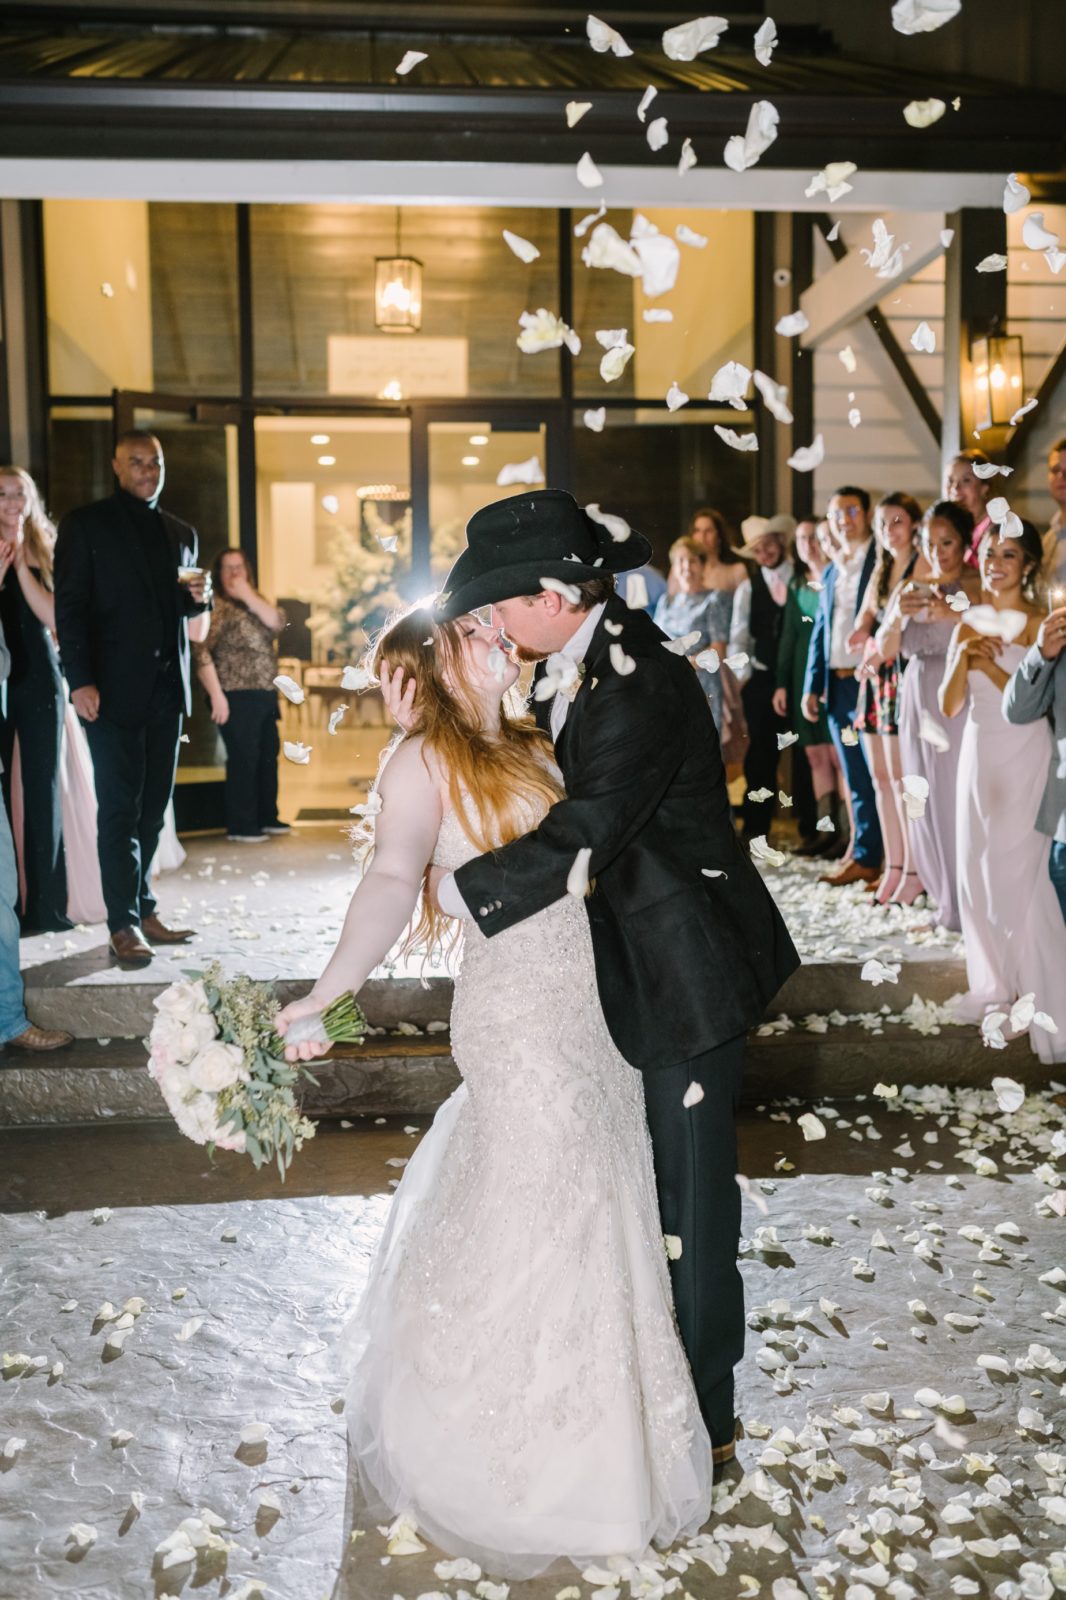 As petals are thrown in the air the bride and groom kiss captured by Christina Elliott Photography. wedding send-off #ChristinaElliottPhotography #ChristinaElliottWeddings #StillWatersRanchWedding #Texasweddings #countrywedding #ranchwedding